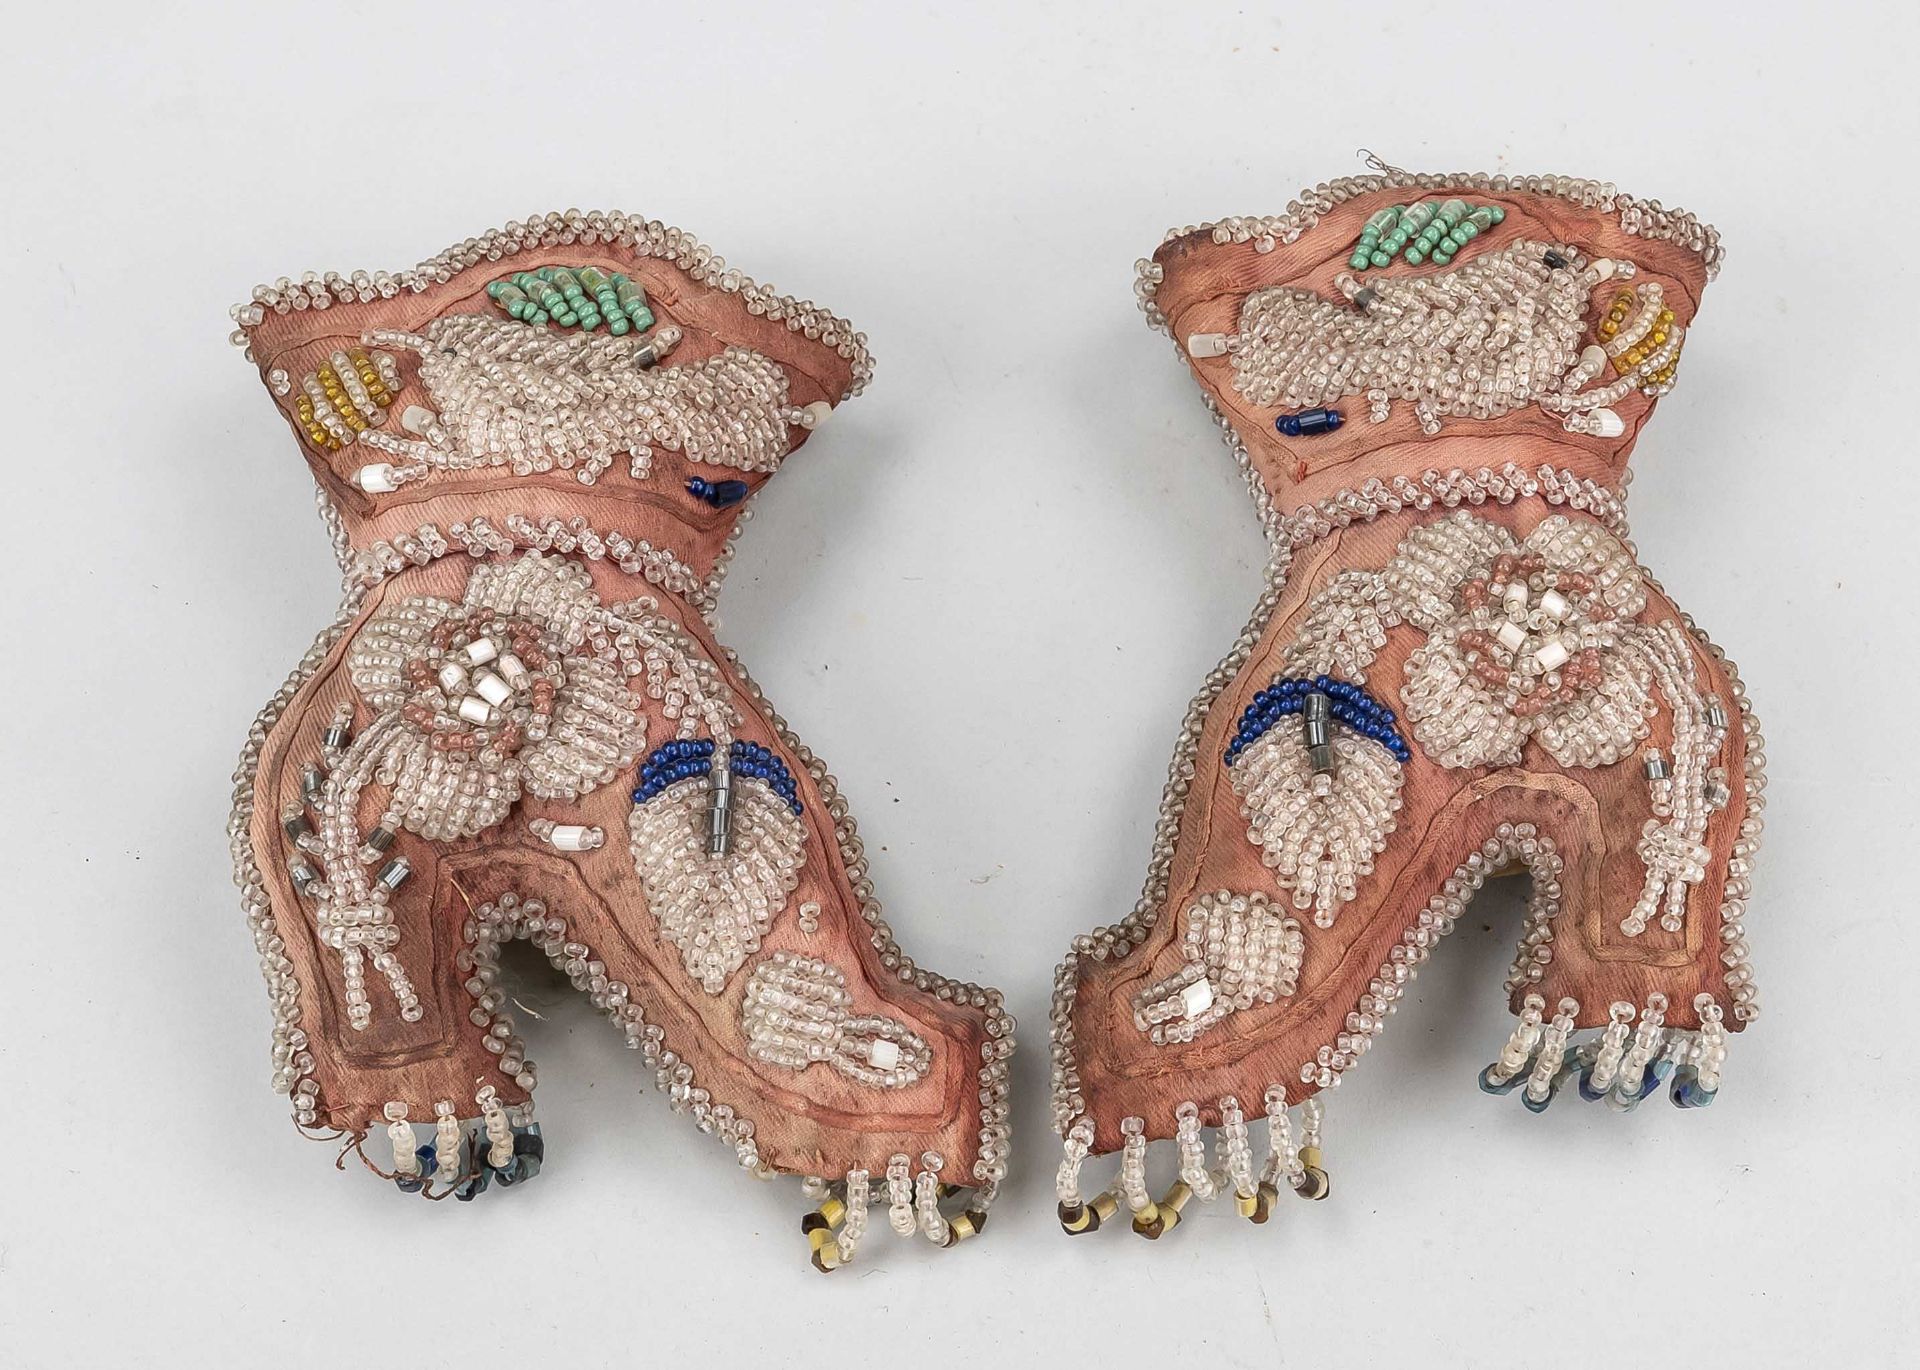 2 American pincushions, c. 1890, stuffed fabric body in the form of two shoes with colorful